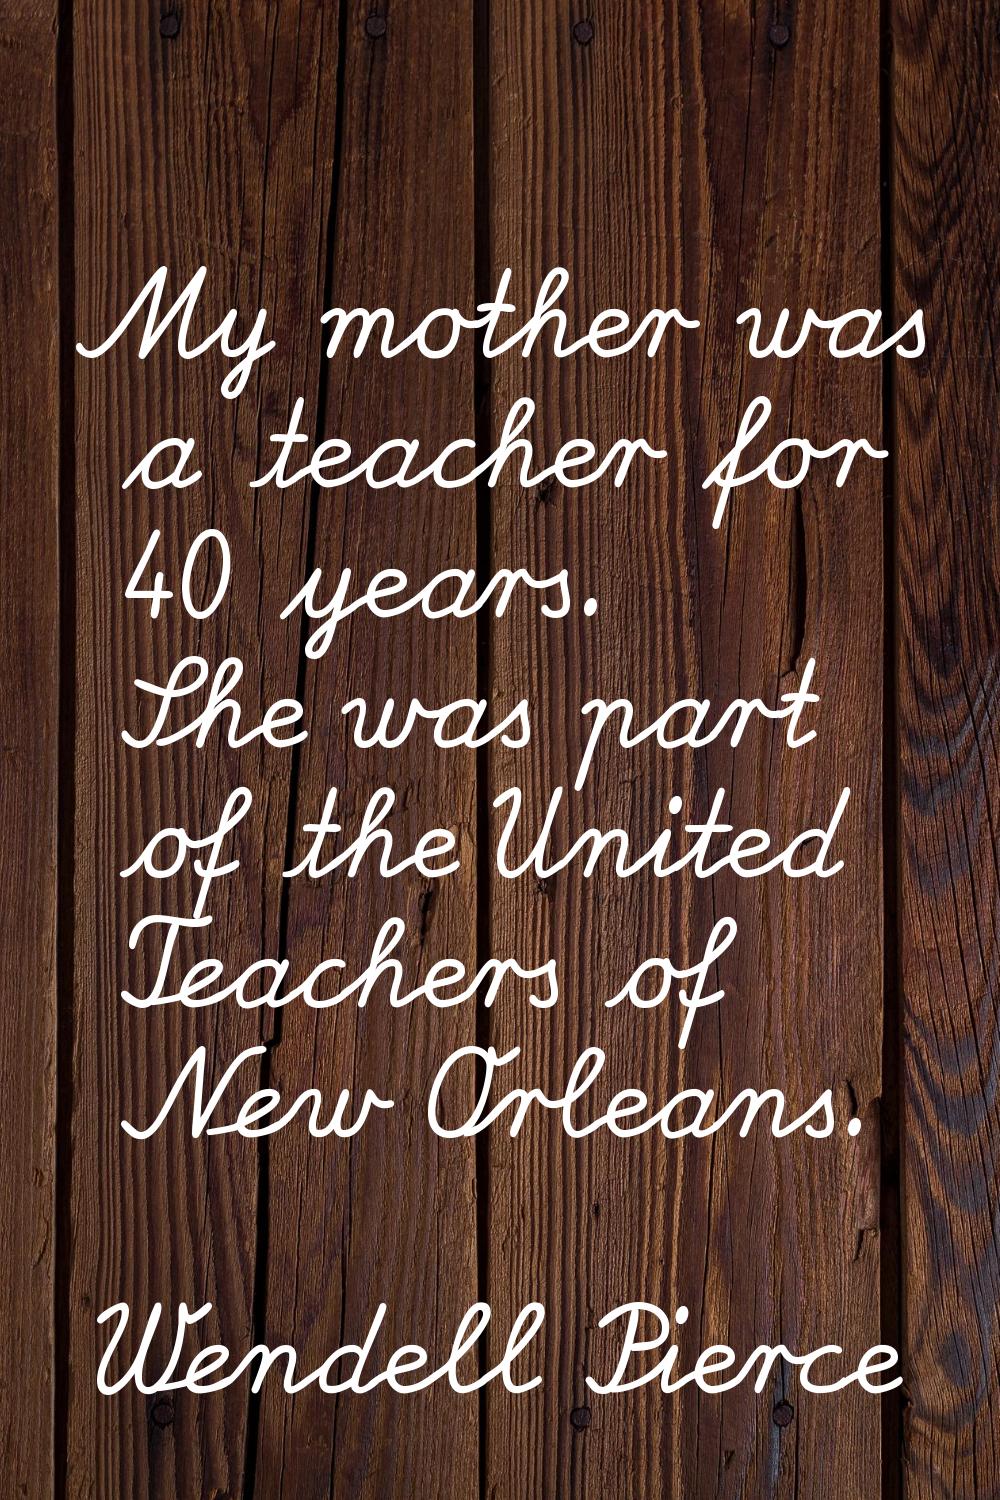 My mother was a teacher for 40 years. She was part of the United Teachers of New Orleans.